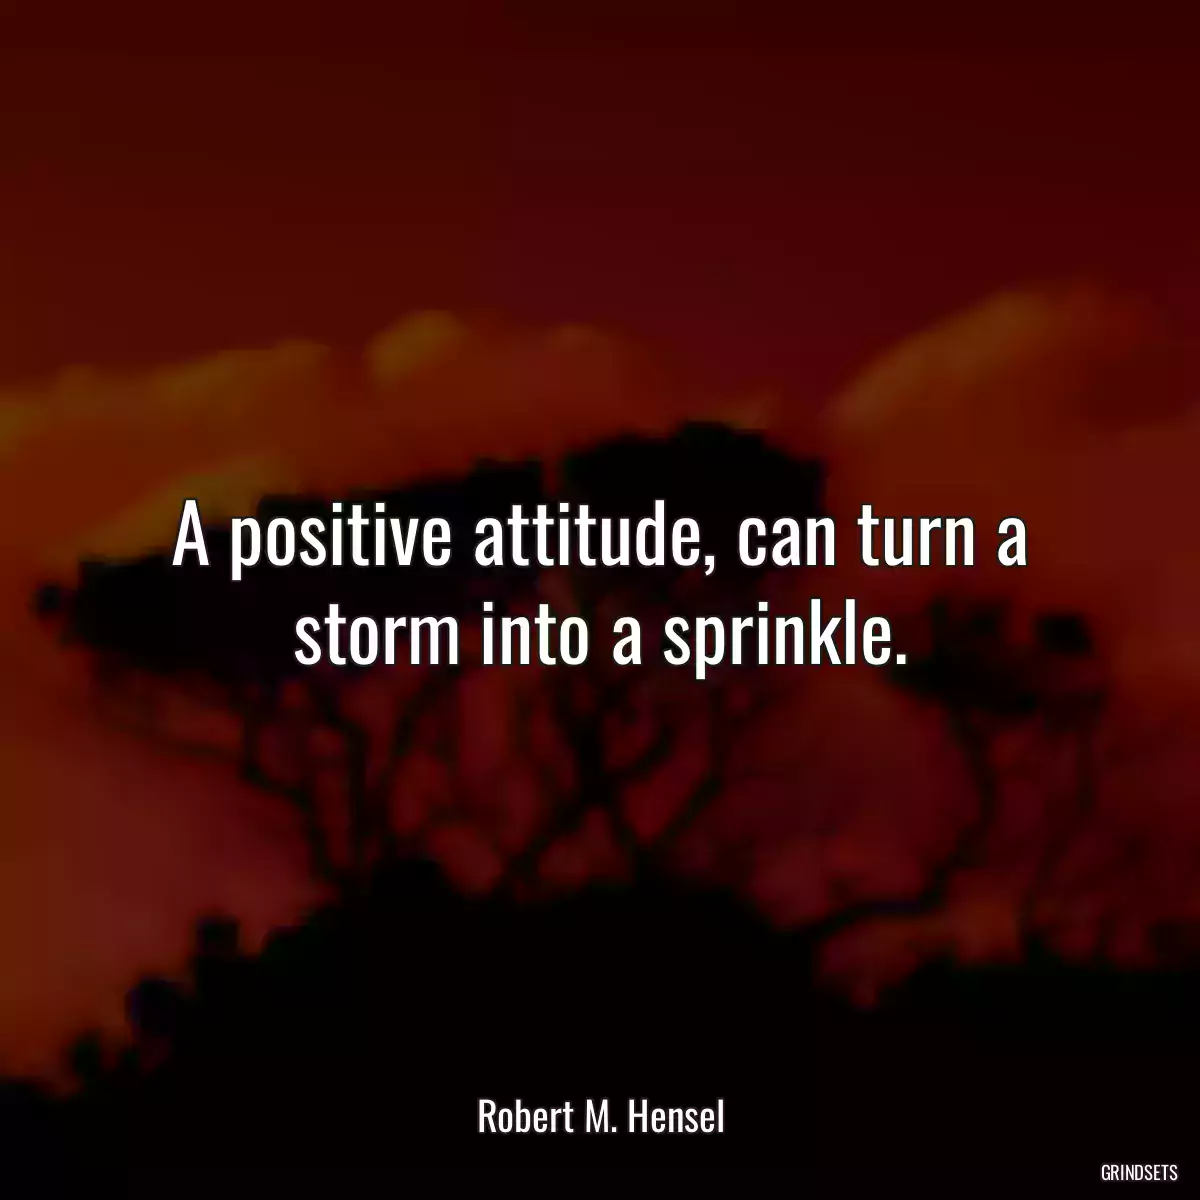 A positive attitude, can turn a storm into a sprinkle.